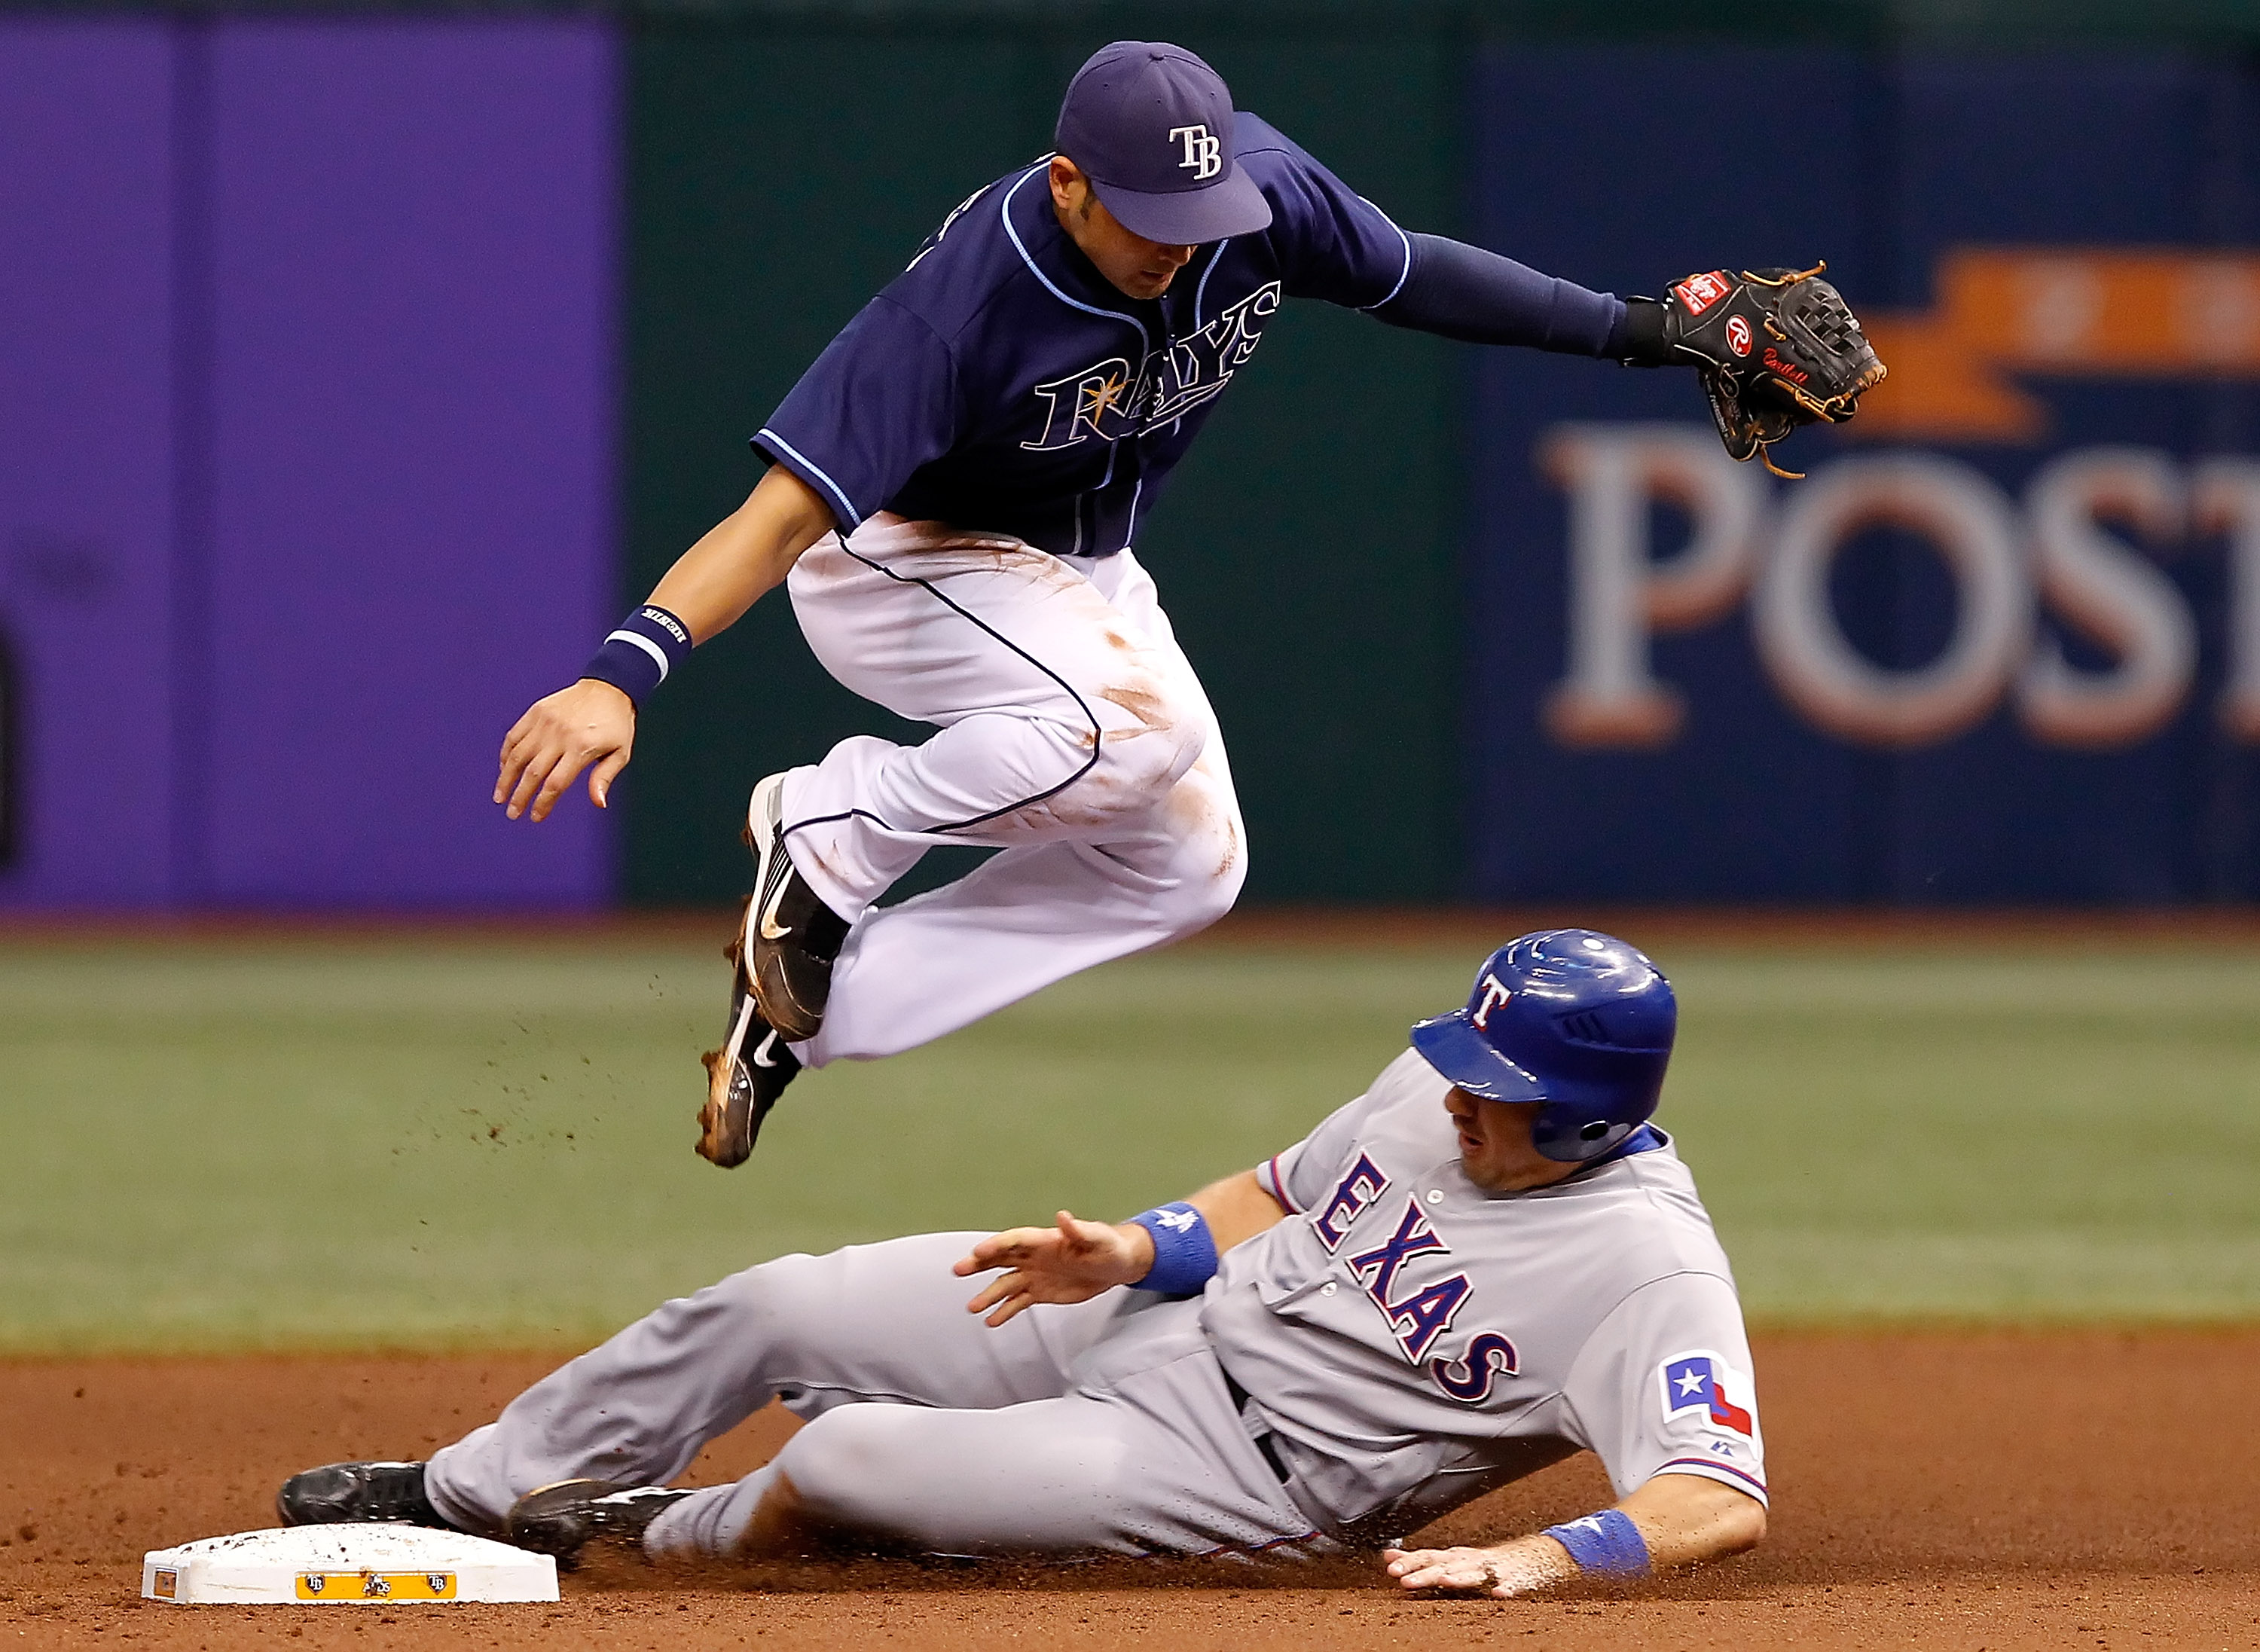 ST. PETERSBURG - OCTOBER 07:  Shortstop Jason Bartlett #8 of the Tampa Bay Rays tries to turn a double play as catcher Matt Treanor #15 of the Texas Rangers is out at second during Game 2 of the ALDS at Tropicana Field on October 7, 2010 in St. Petersburg